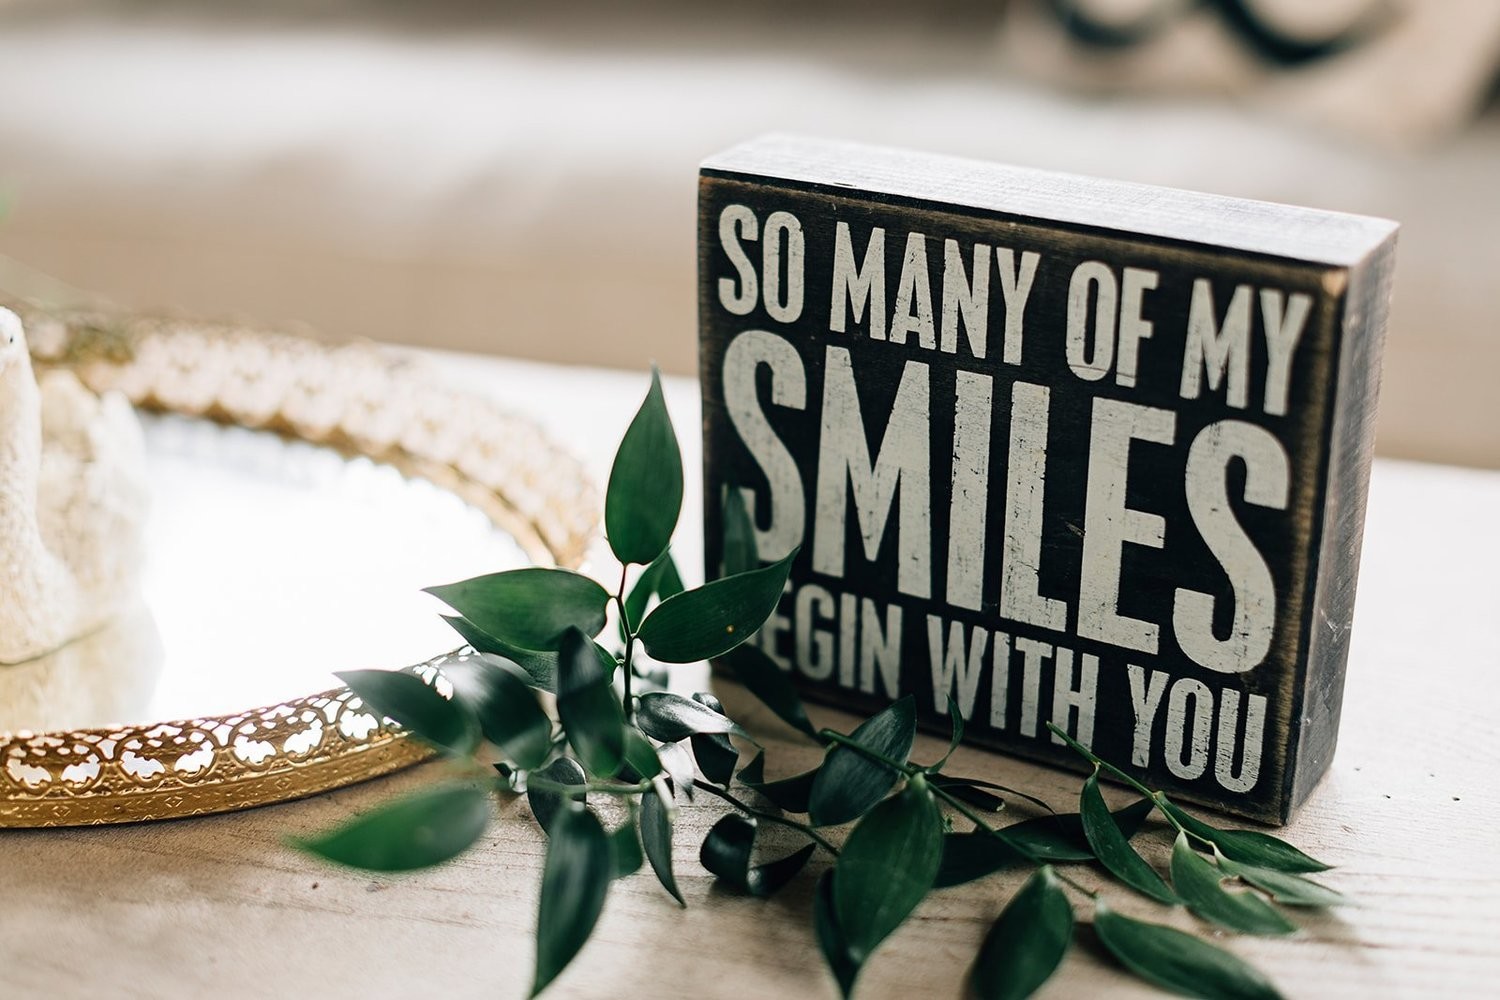 Box Sign "So Many of My Smiles Begin with You"